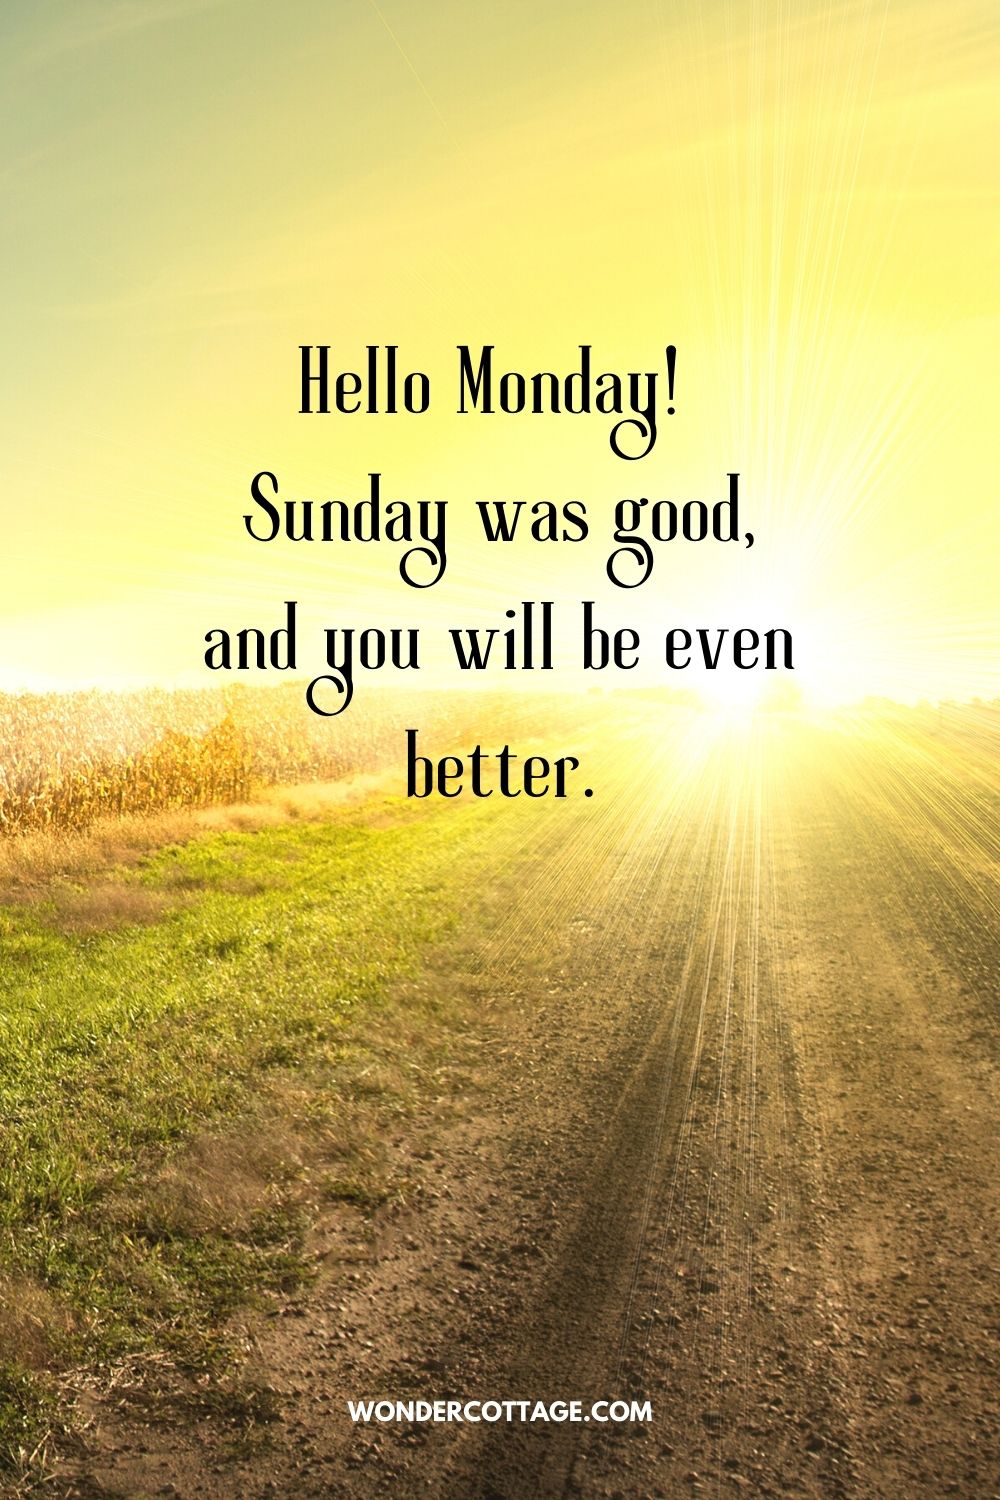 Hello Monday! Sunday was good, and you will be even better.